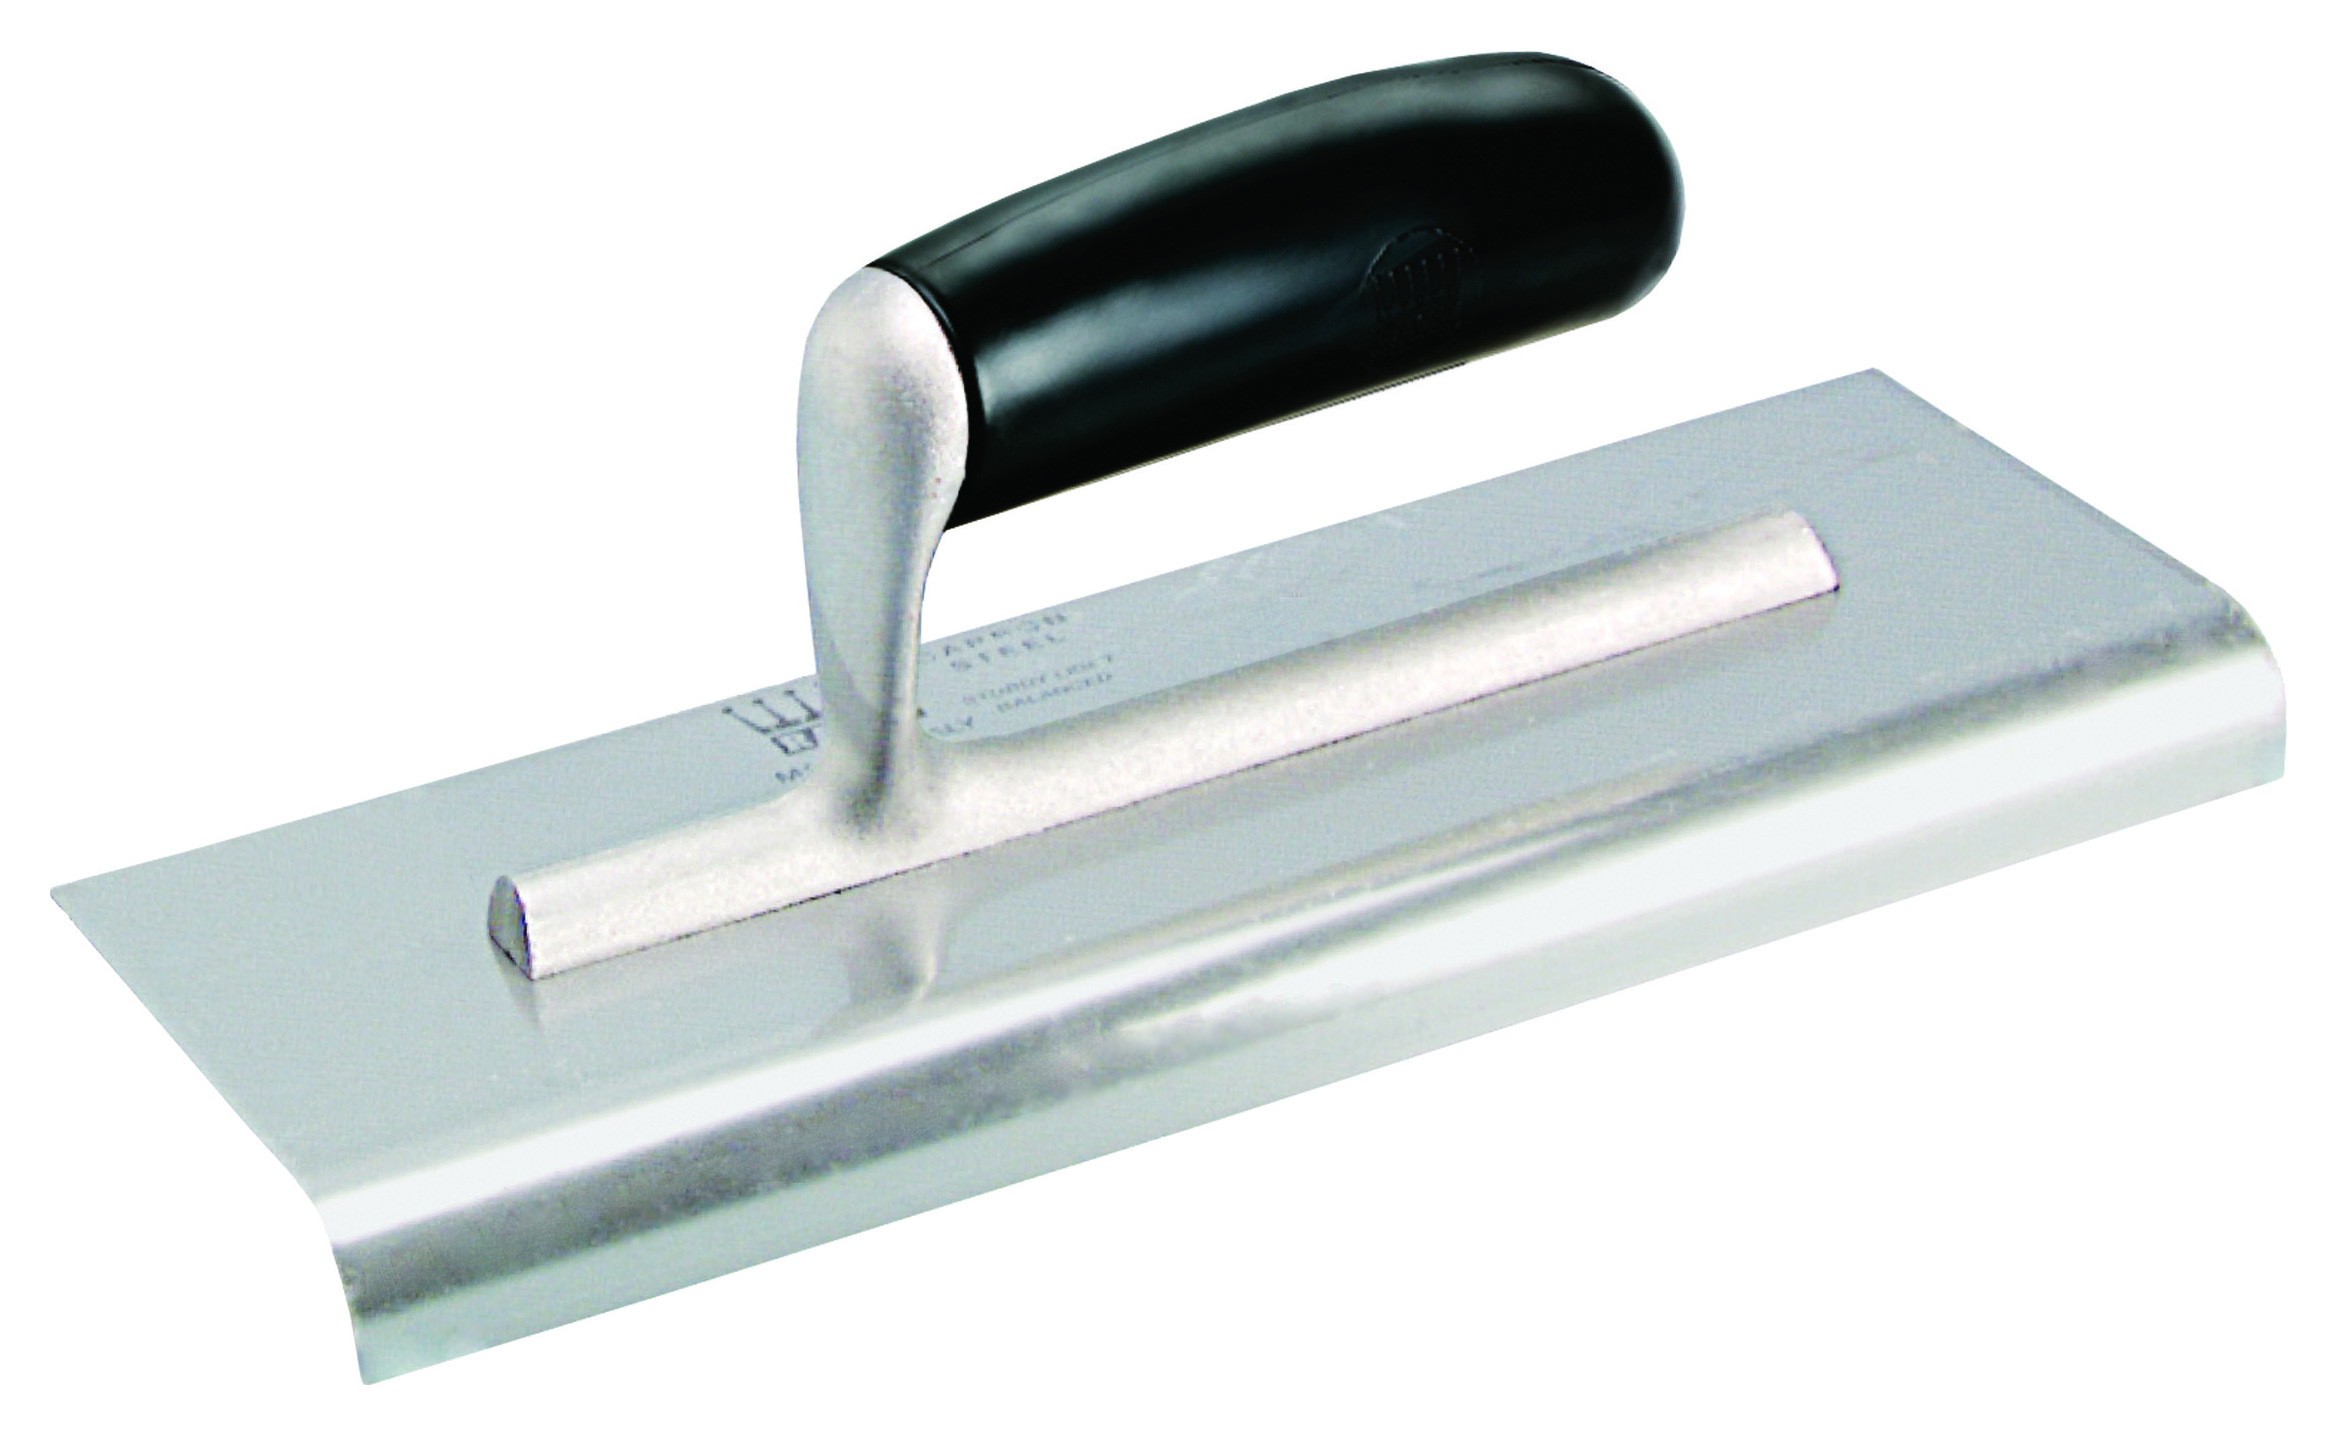 Ragni R01002 Curved End Cement Edging Trowel with ABS Handle - 11in x 4.3/4in